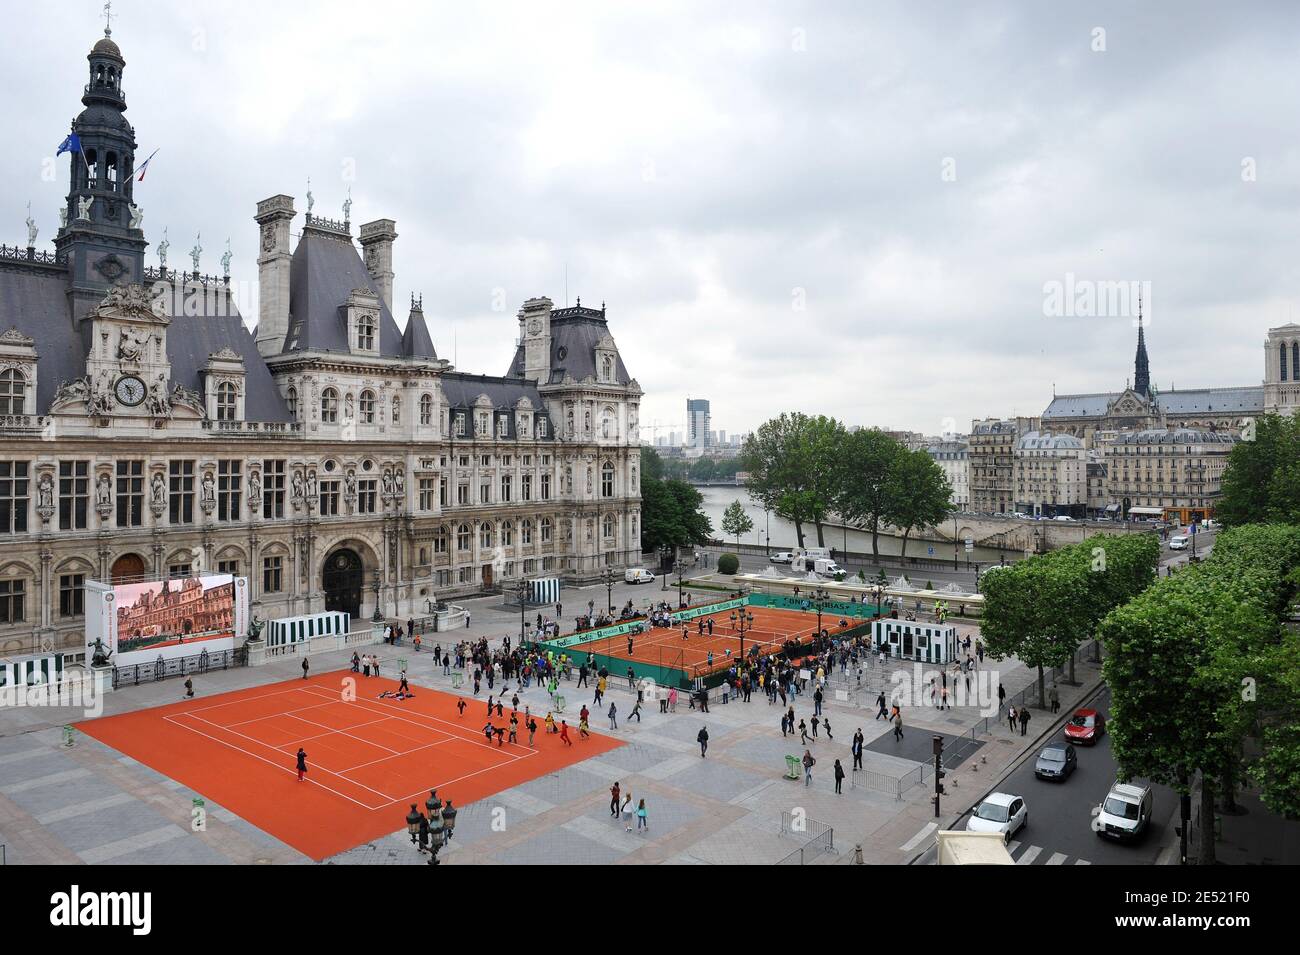 The French tennis federation and the 'Mairie de Paris' organize for 5 days,  a tennis exibition on Paris city hall Square at the Hotel de Ville in Paris,  France on June 4,